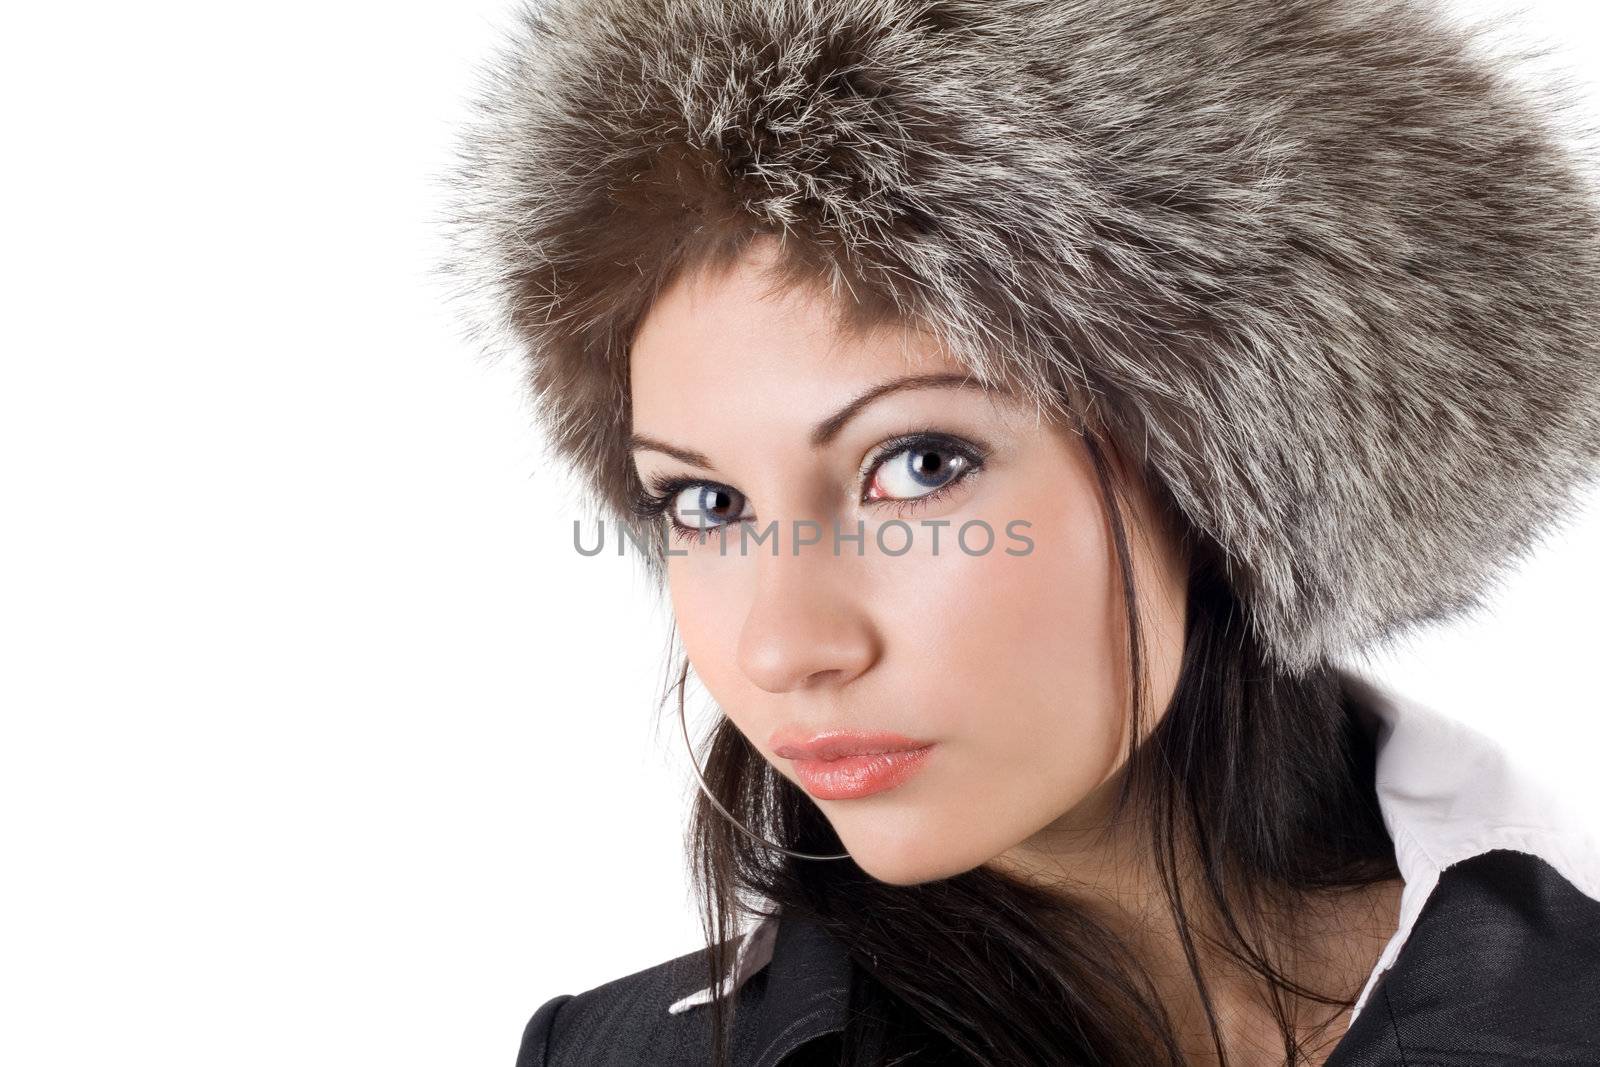 Portrait of the young woman in a fur cap